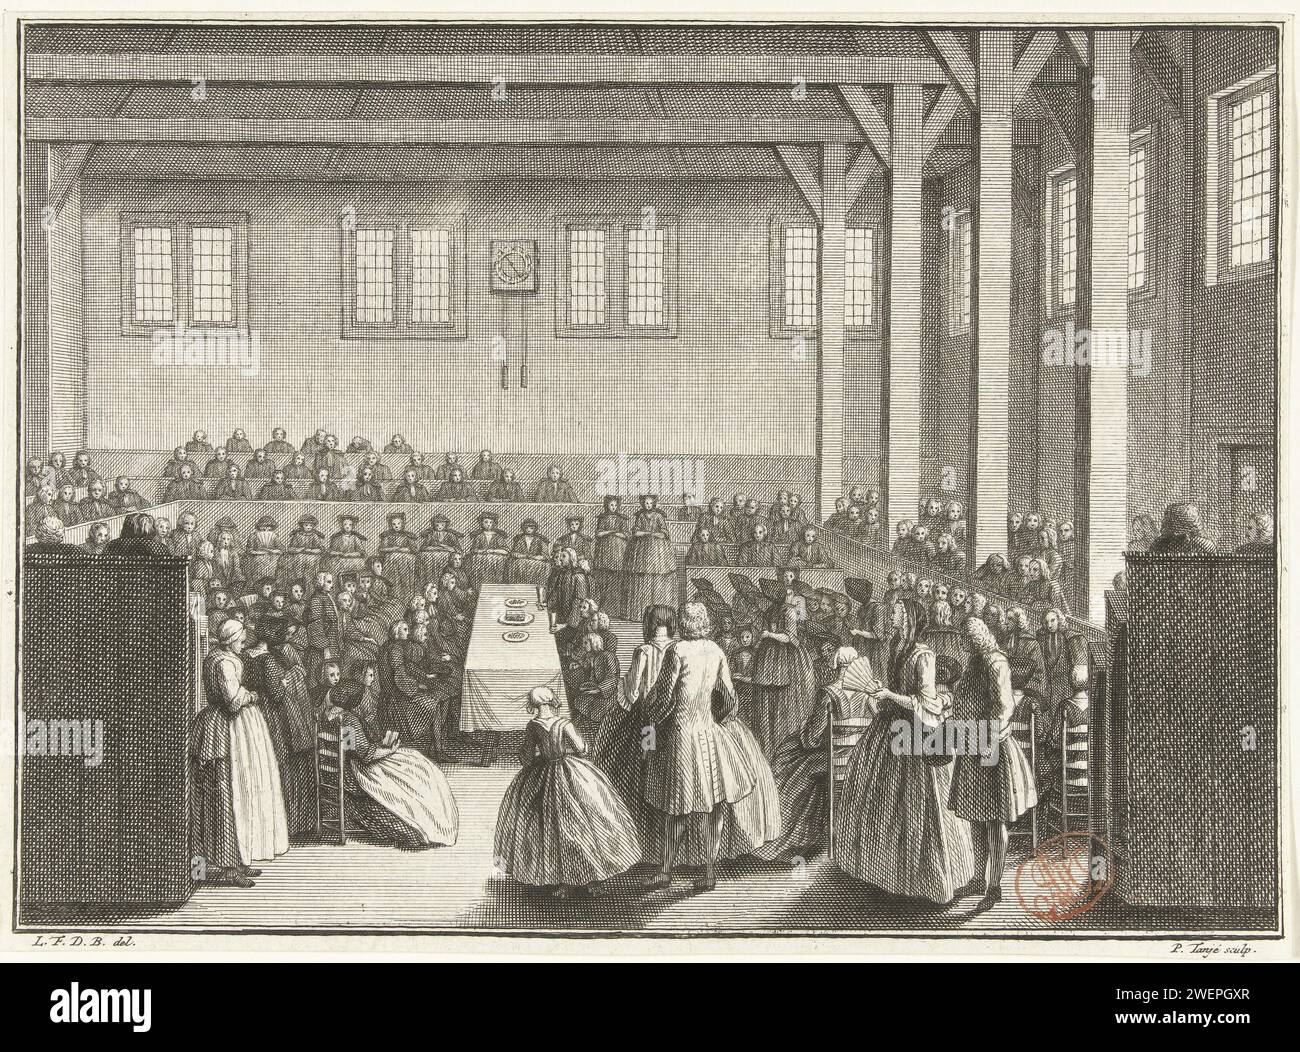 Supper at the Rijnsburg Collegians, ca. 1735, 1734 - 1736 print Supper celebration at the Rijnsburg Collegians, ca. 1735. Church interior with members of the municipality and predecessors to the Supper.  paper etching / engraving Holy Communion  Protestant service Rijnsburg Stock Photo